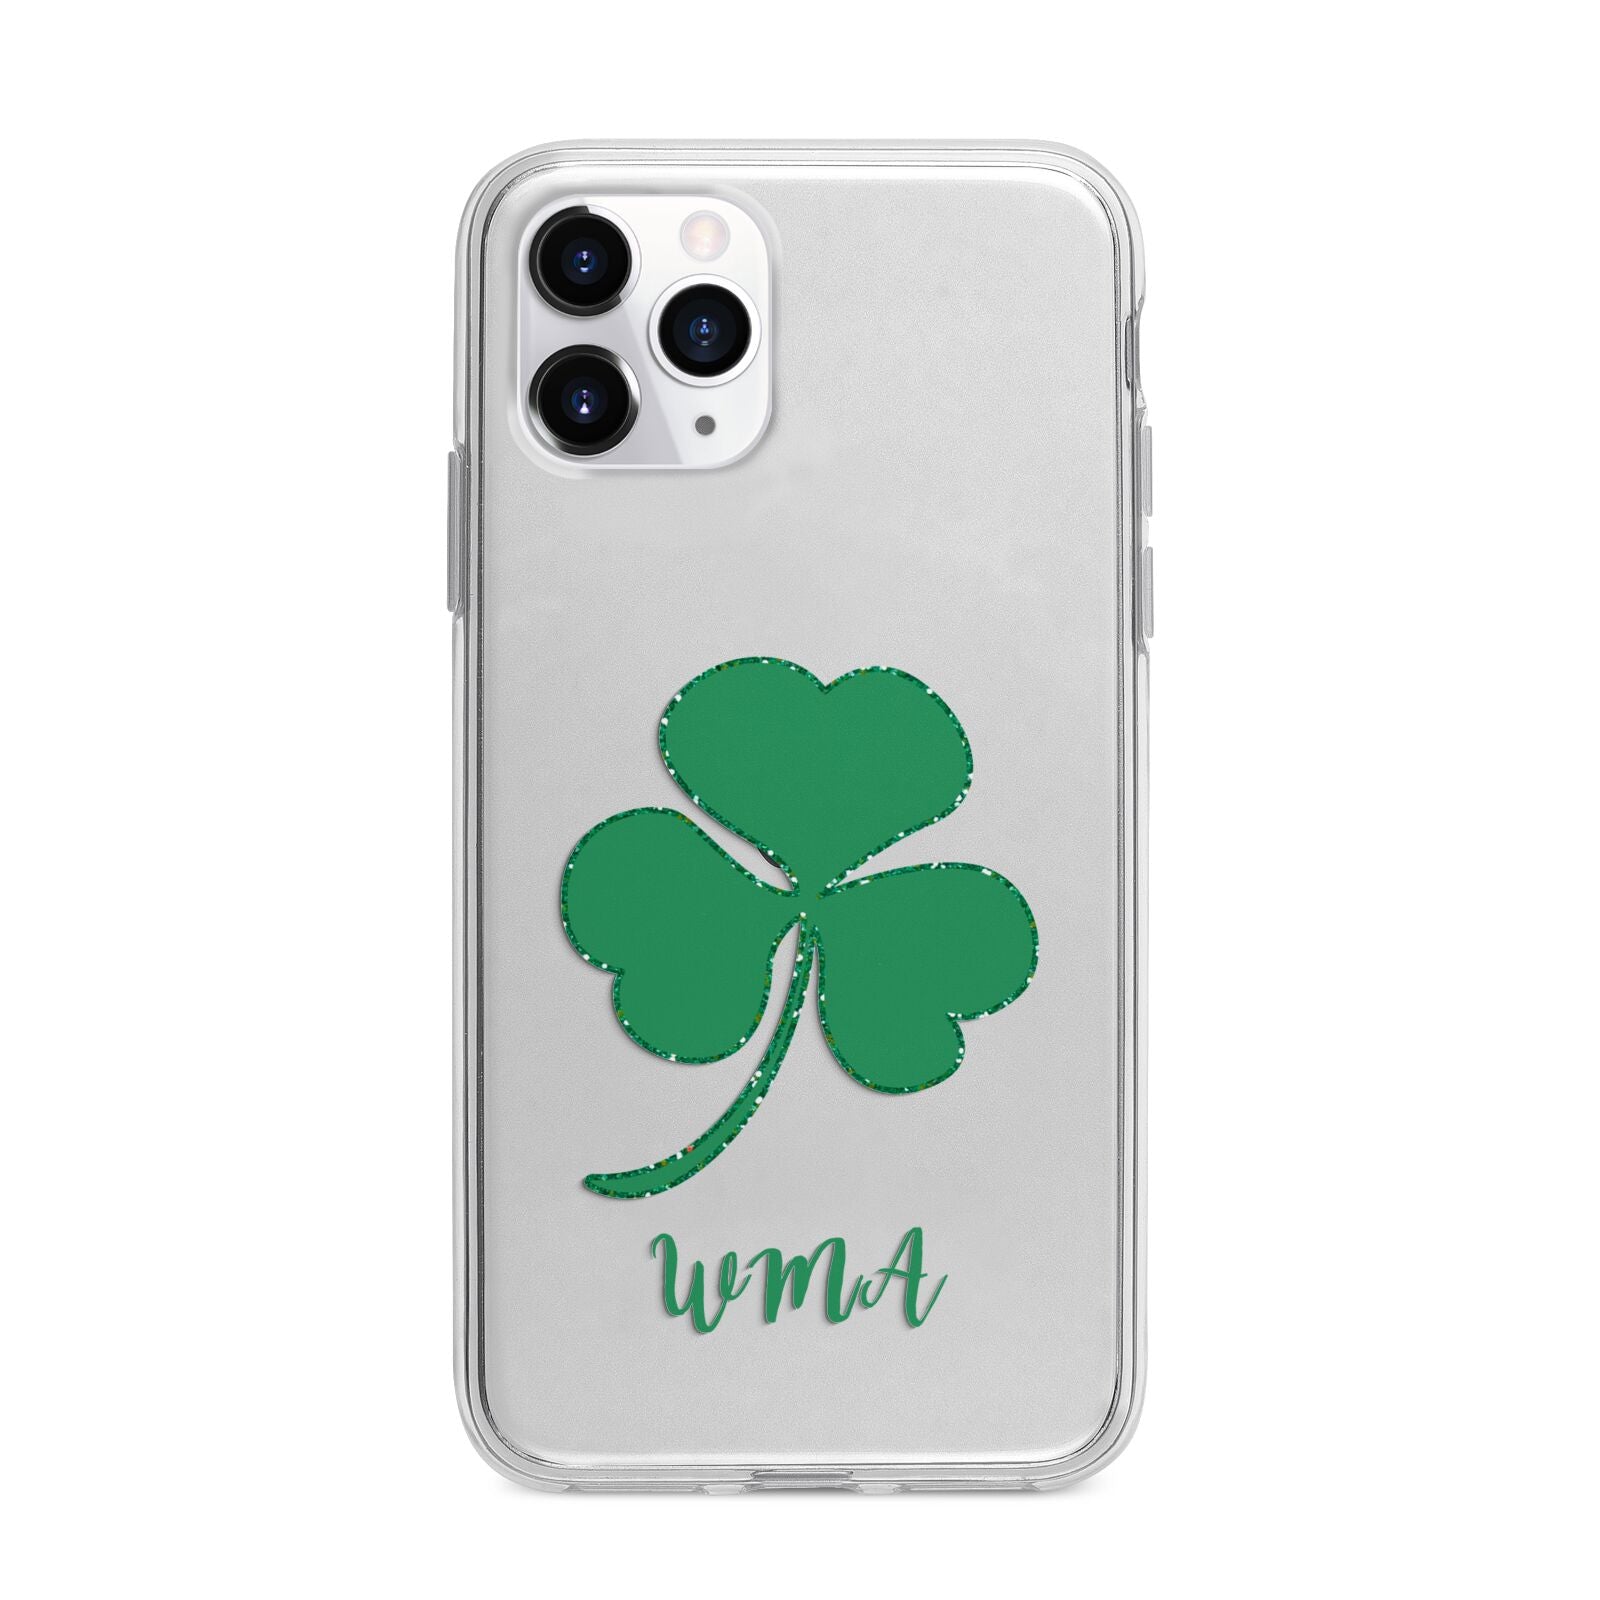 Initialled Shamrock Custom Apple iPhone 11 Pro in Silver with Bumper Case